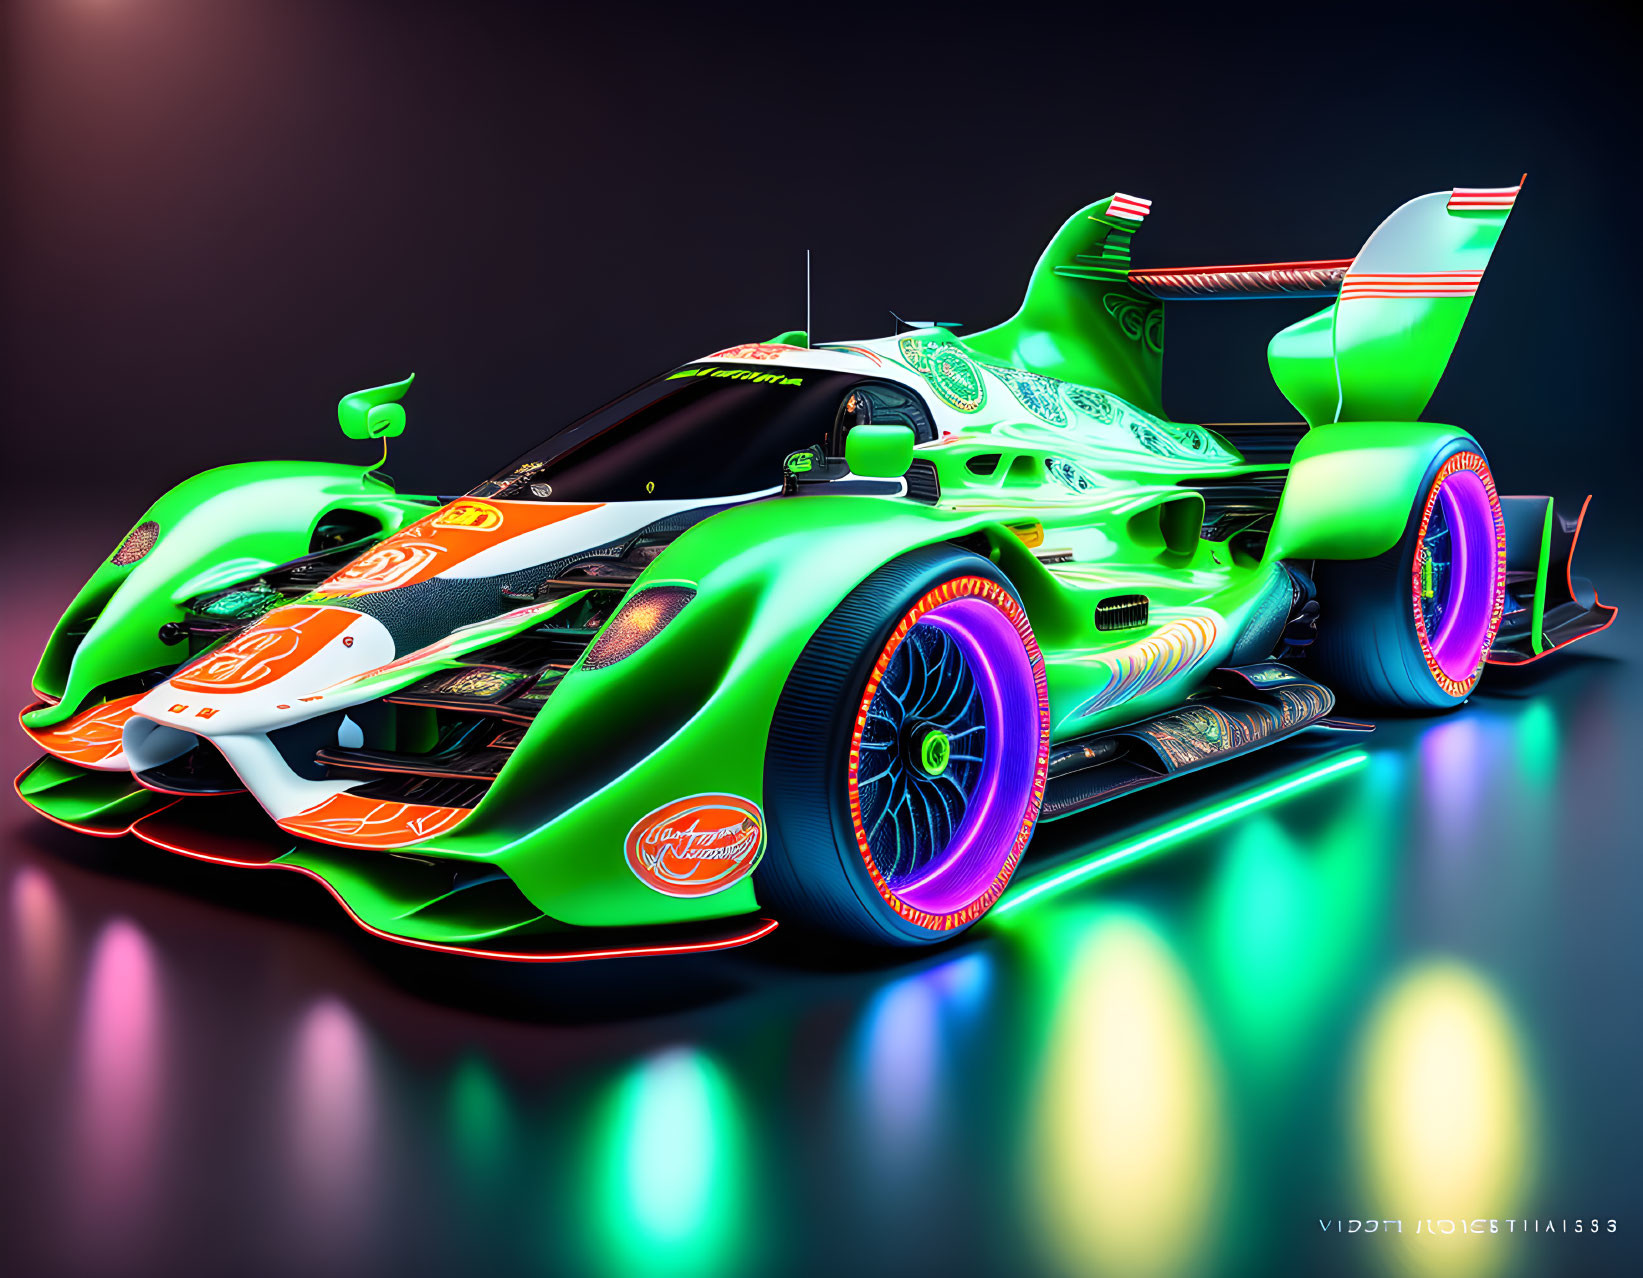 Colorful Green and Orange Race Car with Aerodynamic Features on Dark Background